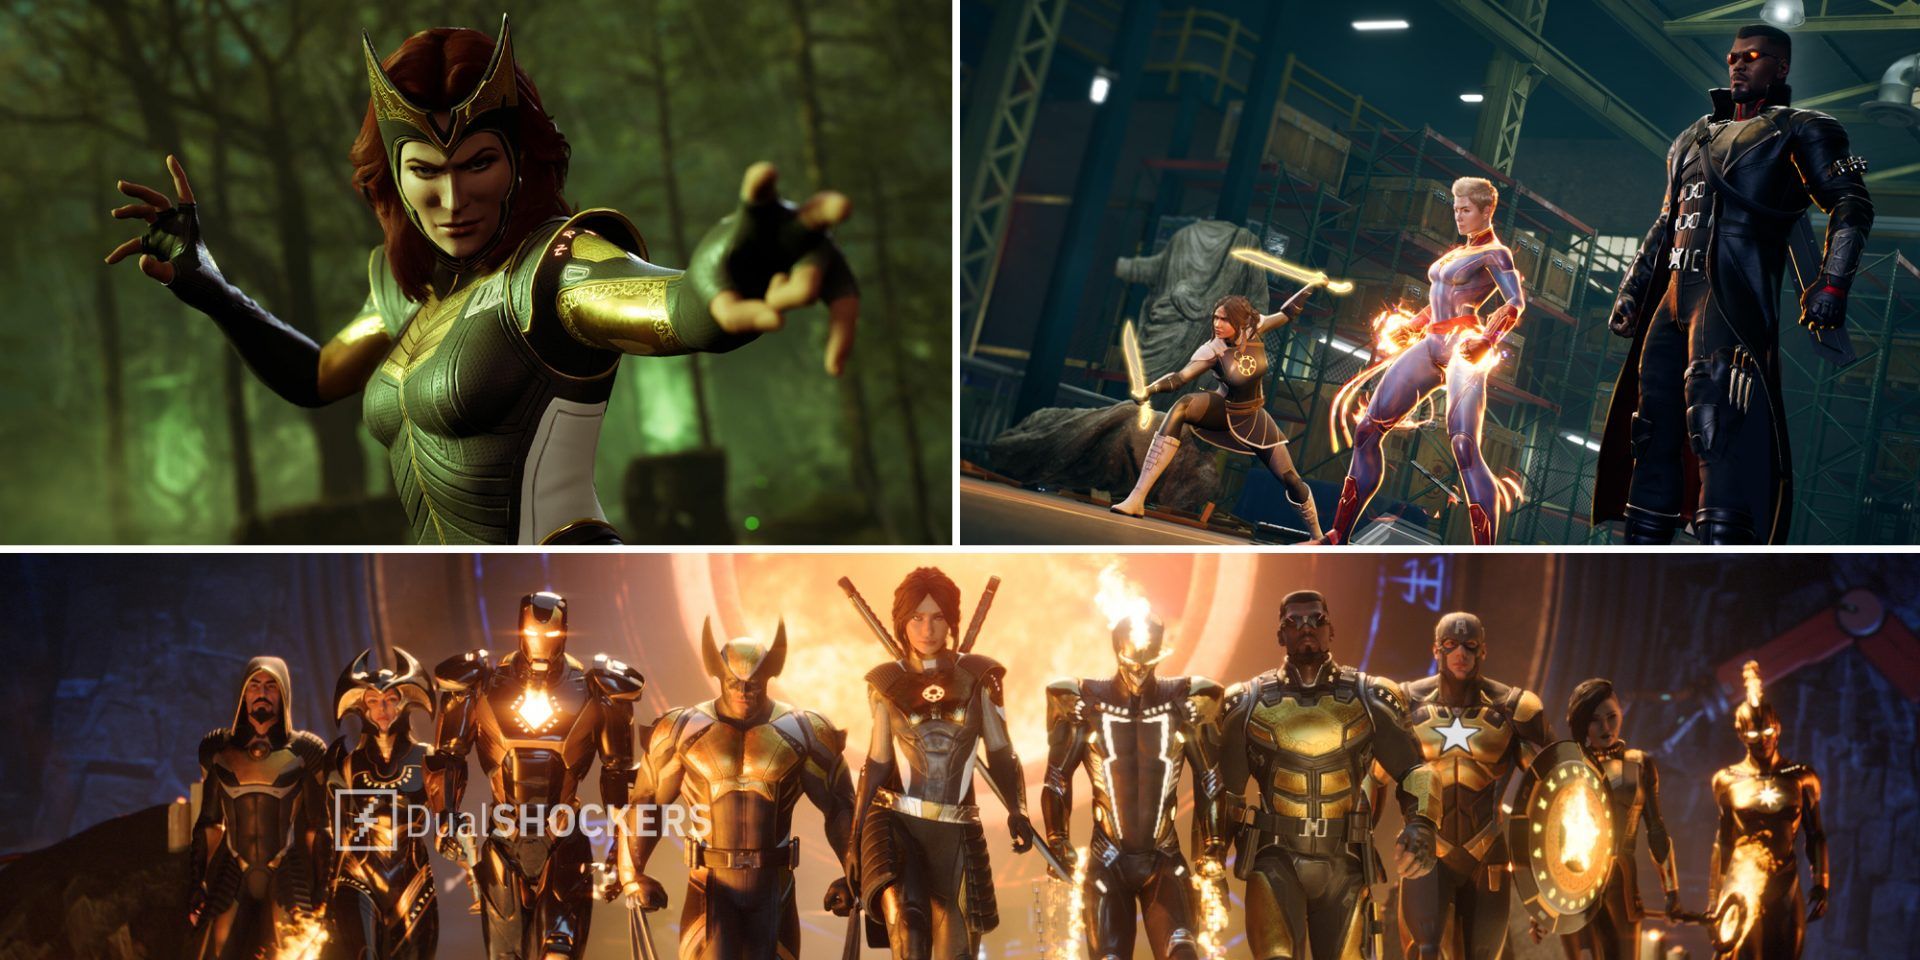 Marvel's Midnight Suns The Scarlet Witch on top left, Marvel characters ready to fight on top right, Marvel's Midnight Suns cast of characters on bottom